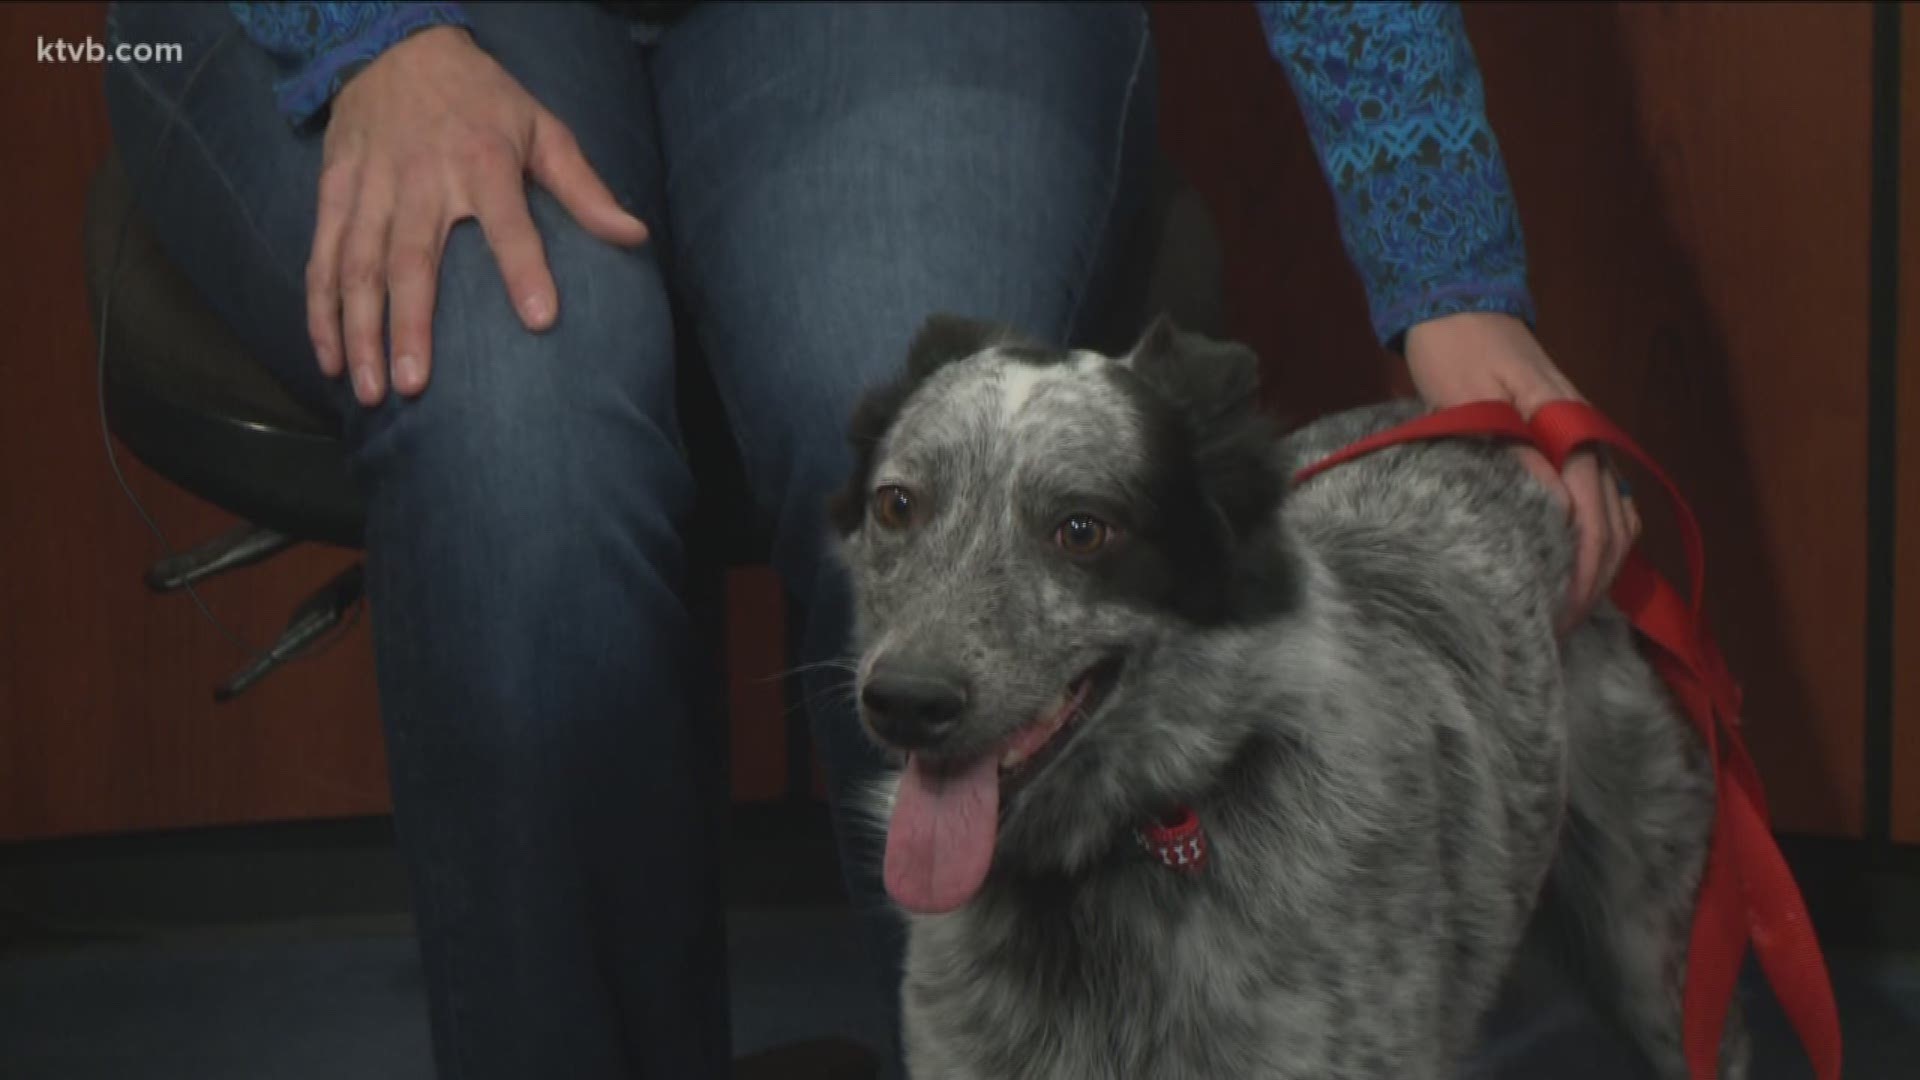 The Idaho Humane Society is looking for someone to adopt this 4-year-old Australian cattle dog.